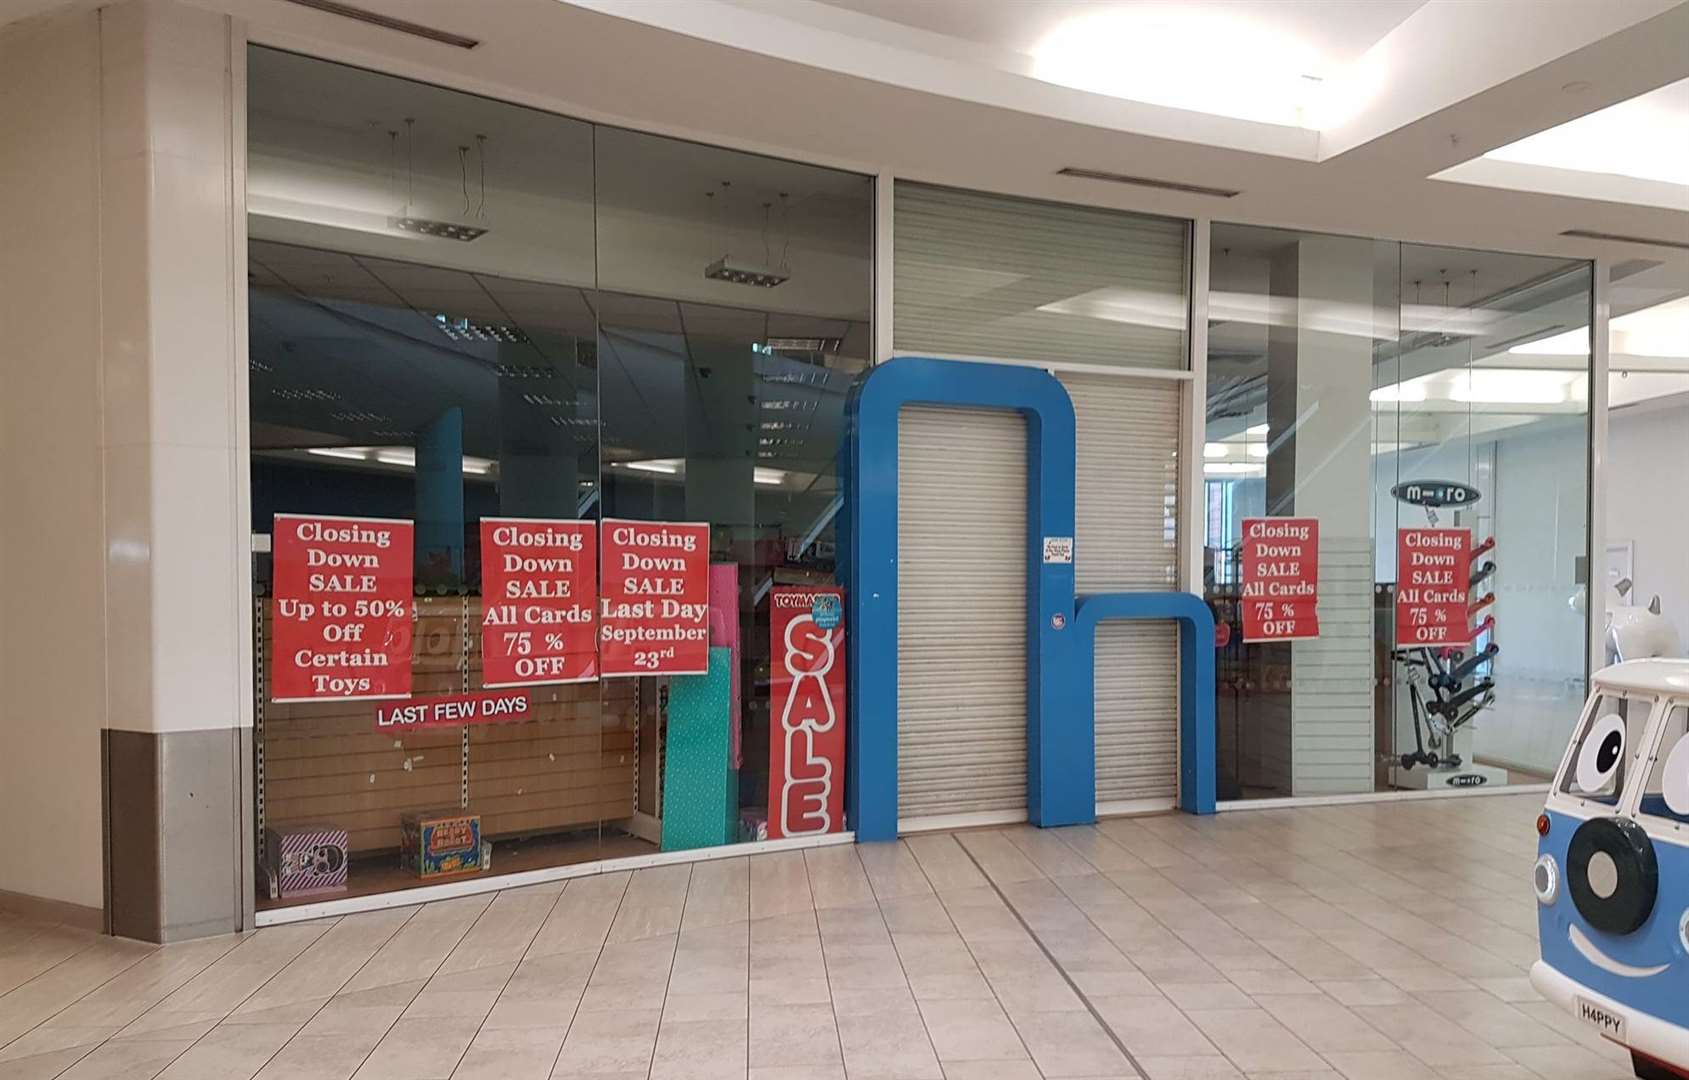 The Kids Stuff Toy shop closed in 2018